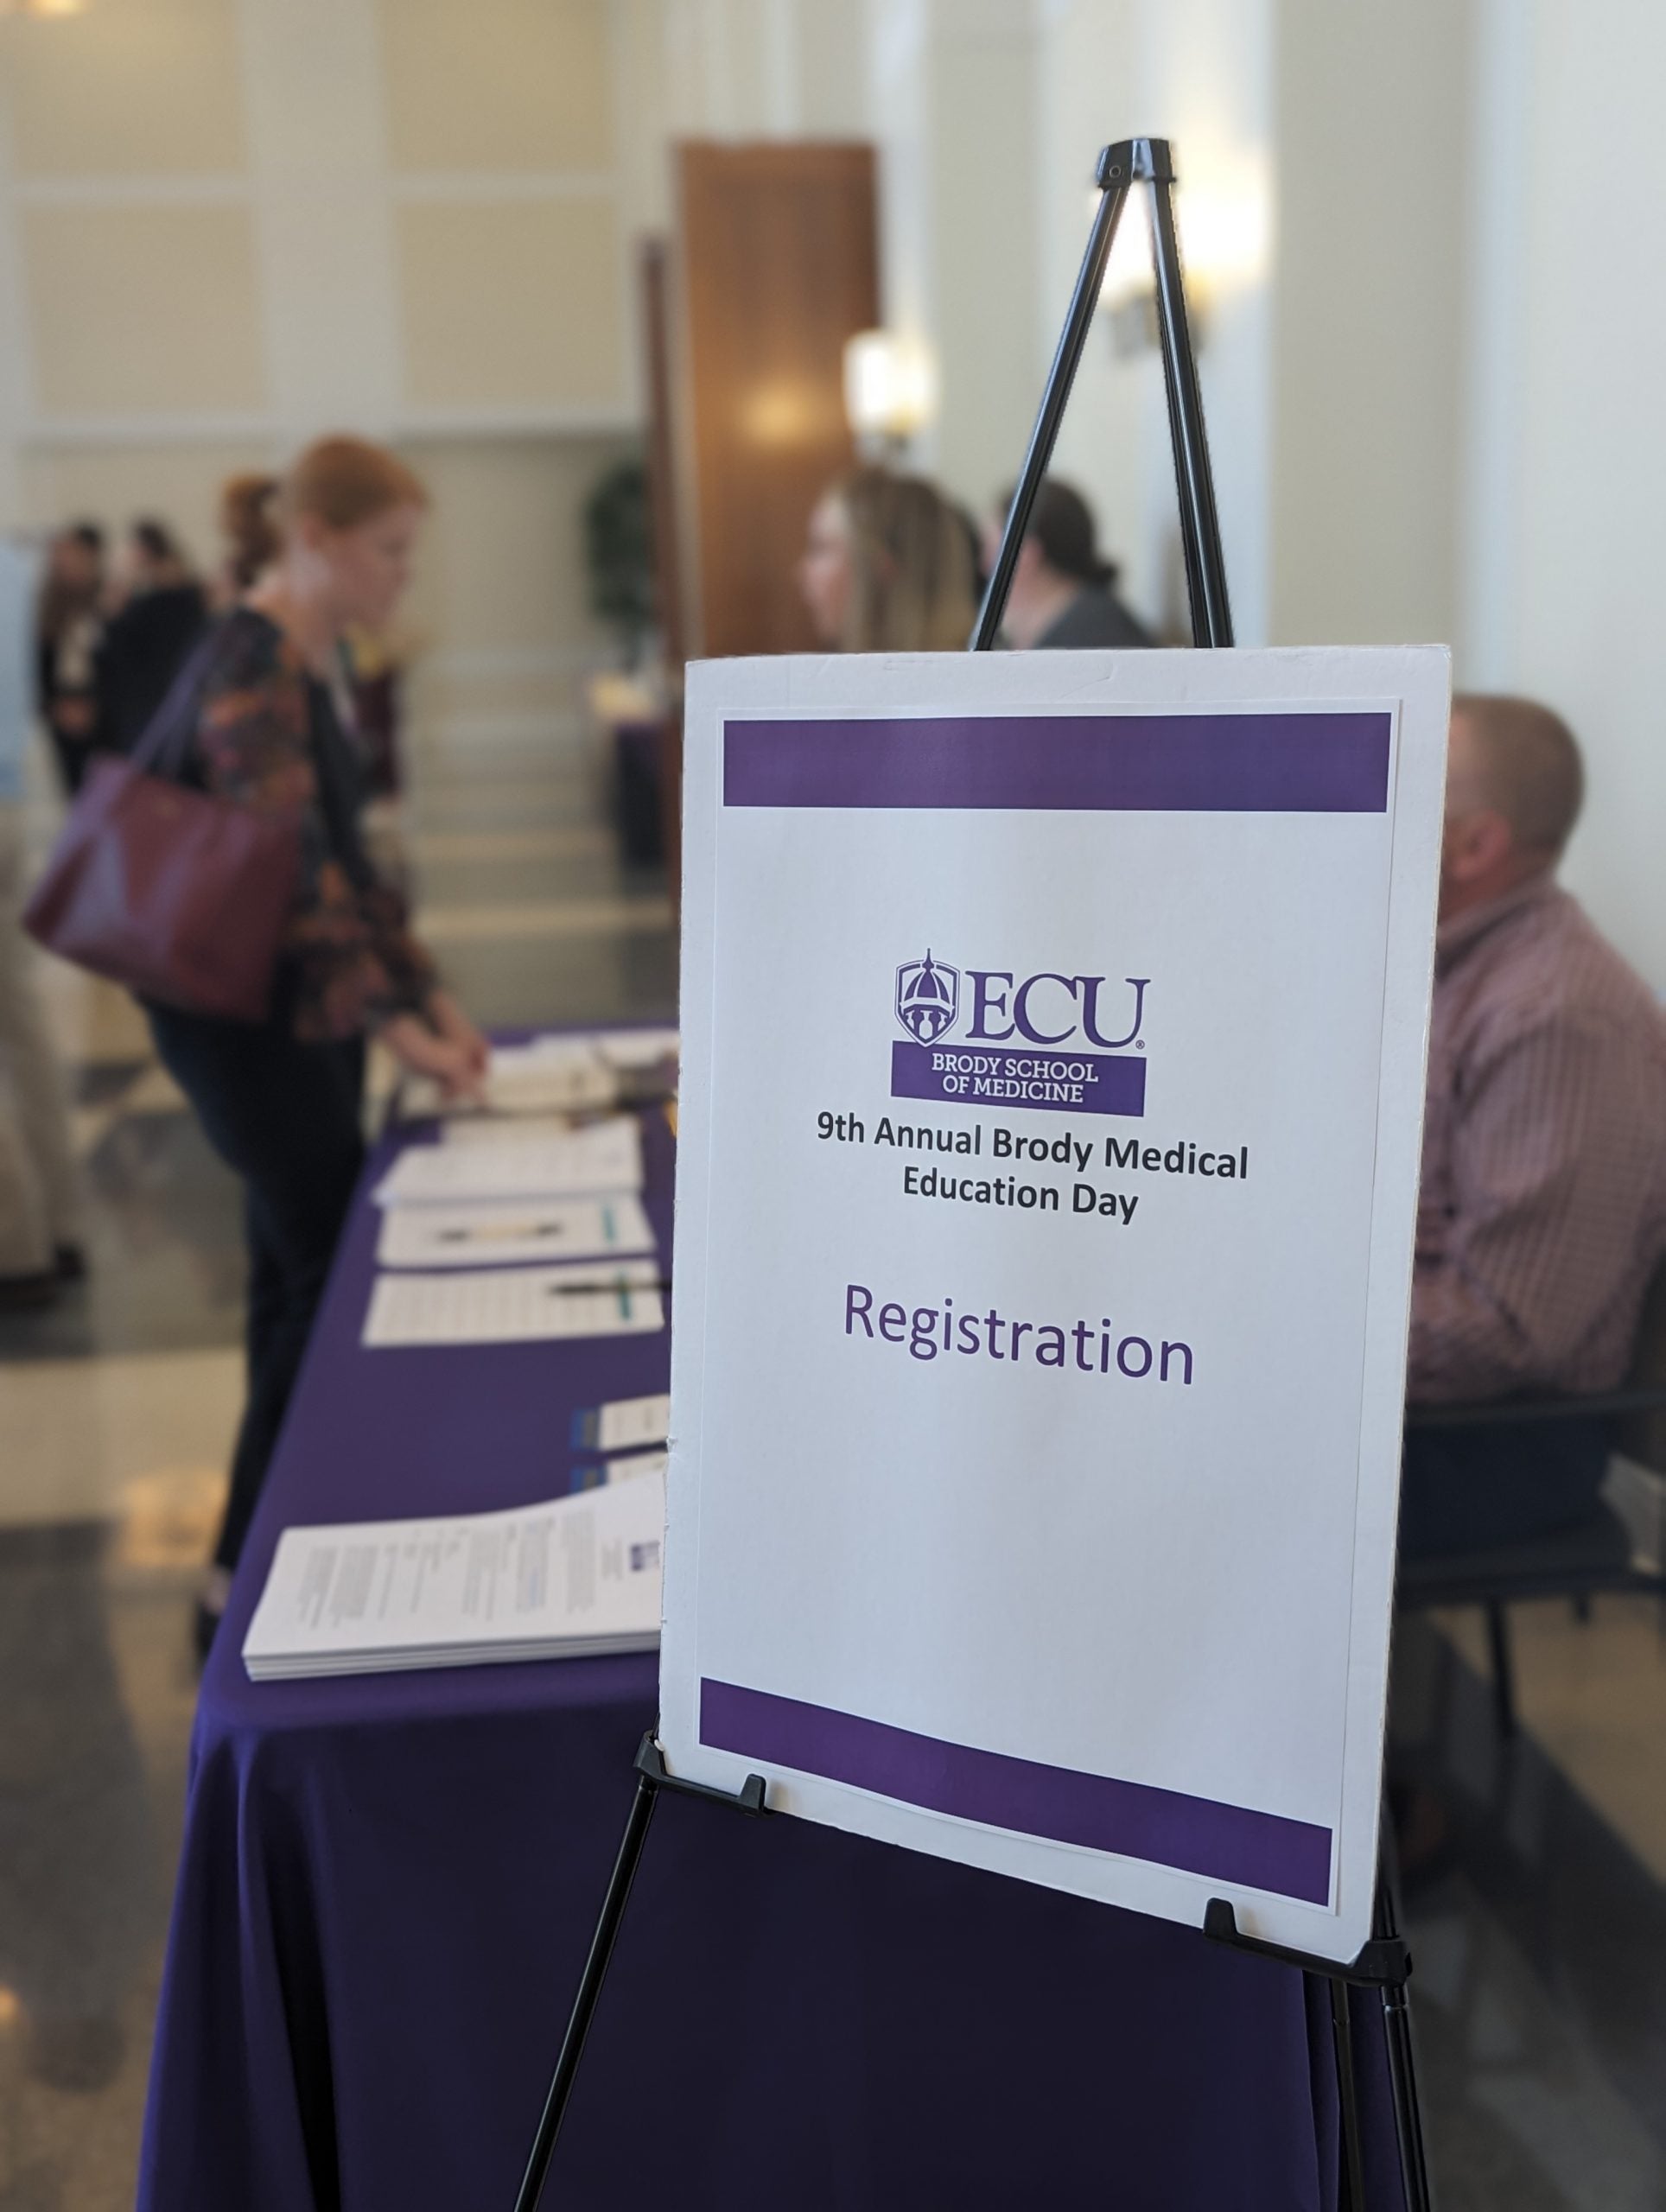 A sign for Registration at the ninth annual Brody Medical Education Day